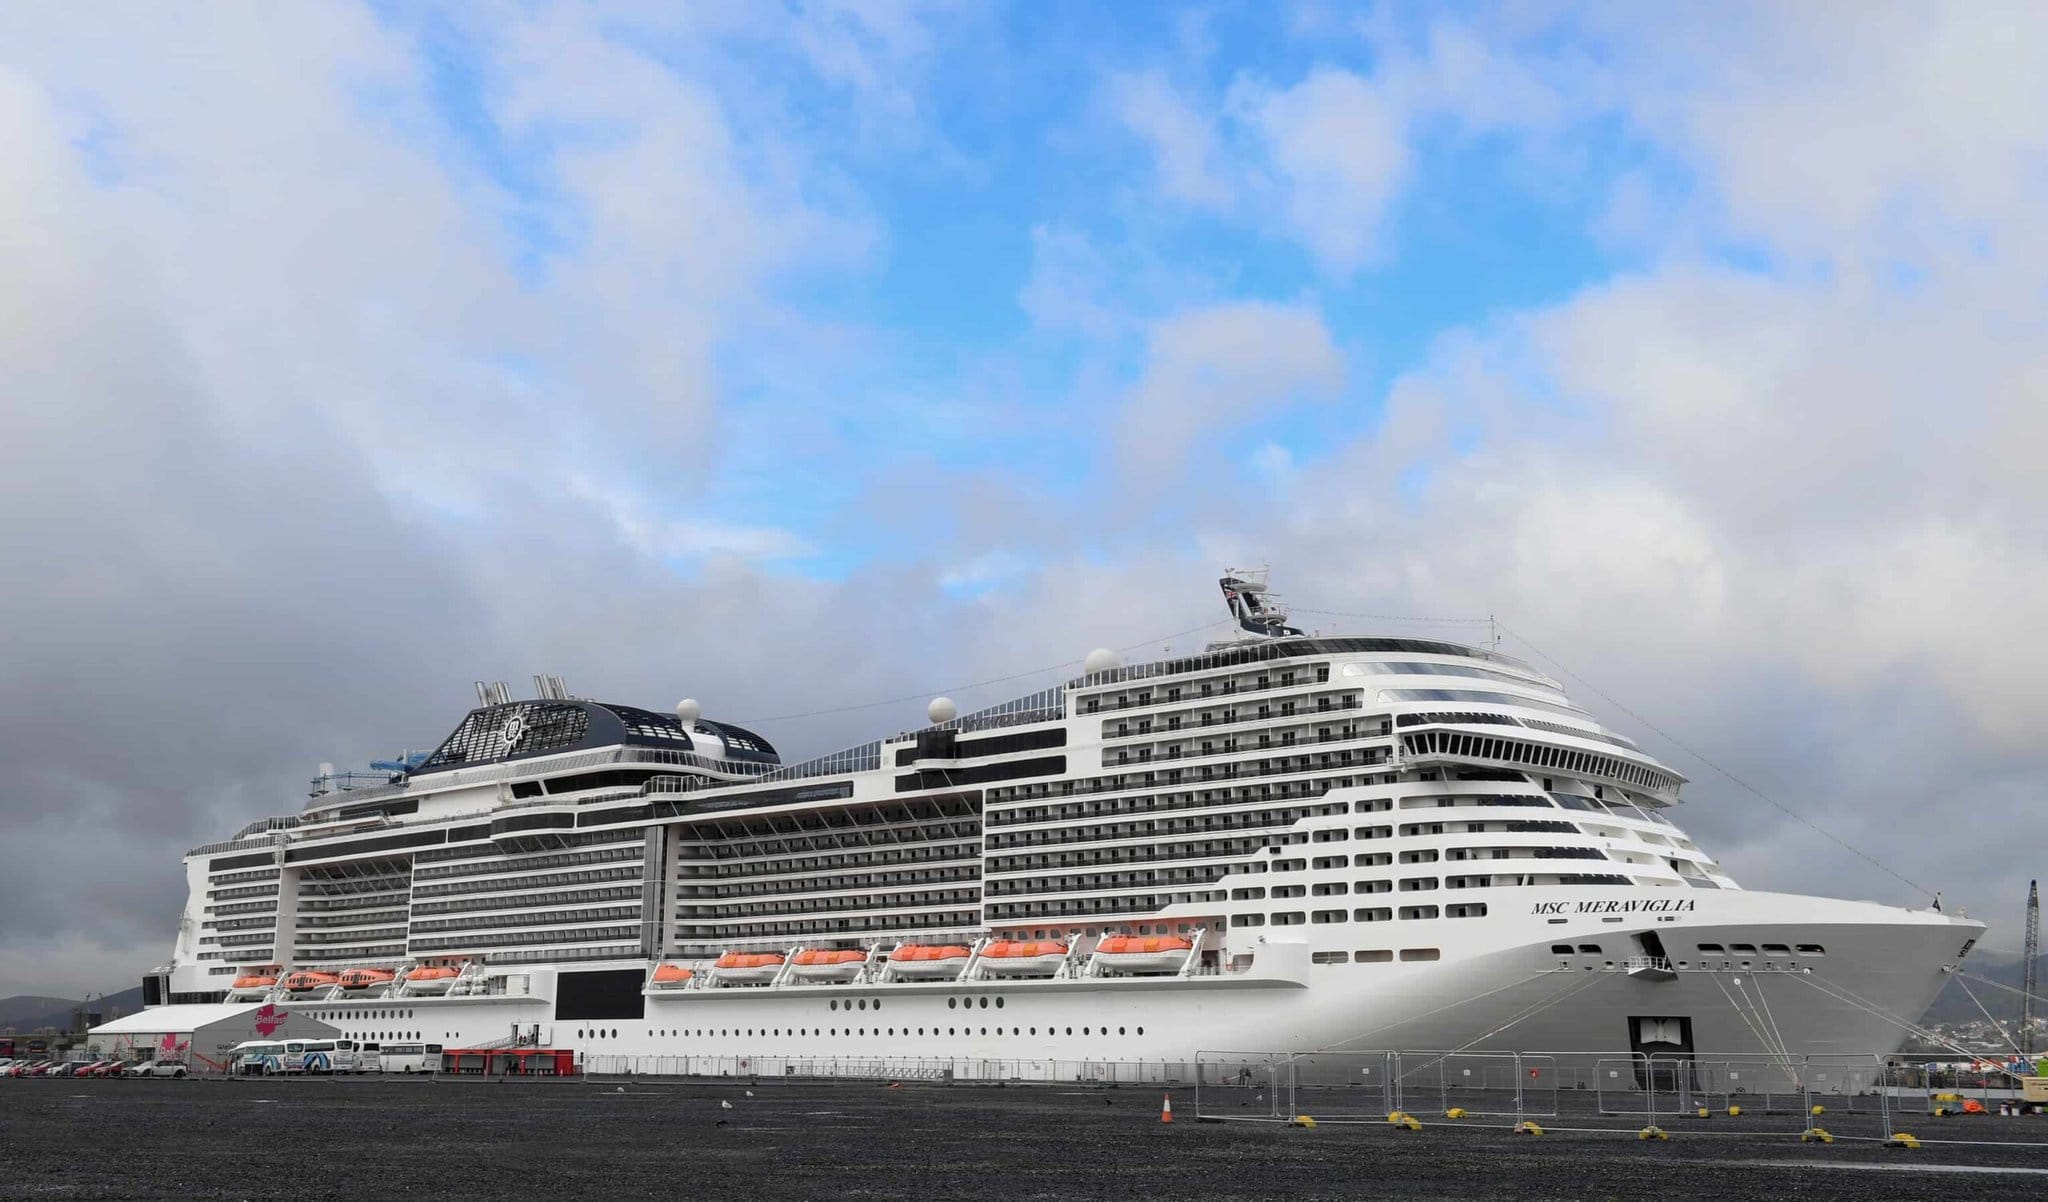 MSC Meraviglia, the largest ever cruise ship to visit Belfast, docking in Belfast Harbour for its maiden call. Alan Lewis- PhotopressBelfast.co.uk 26/9/2019 Photo By Justin Kernoghan.